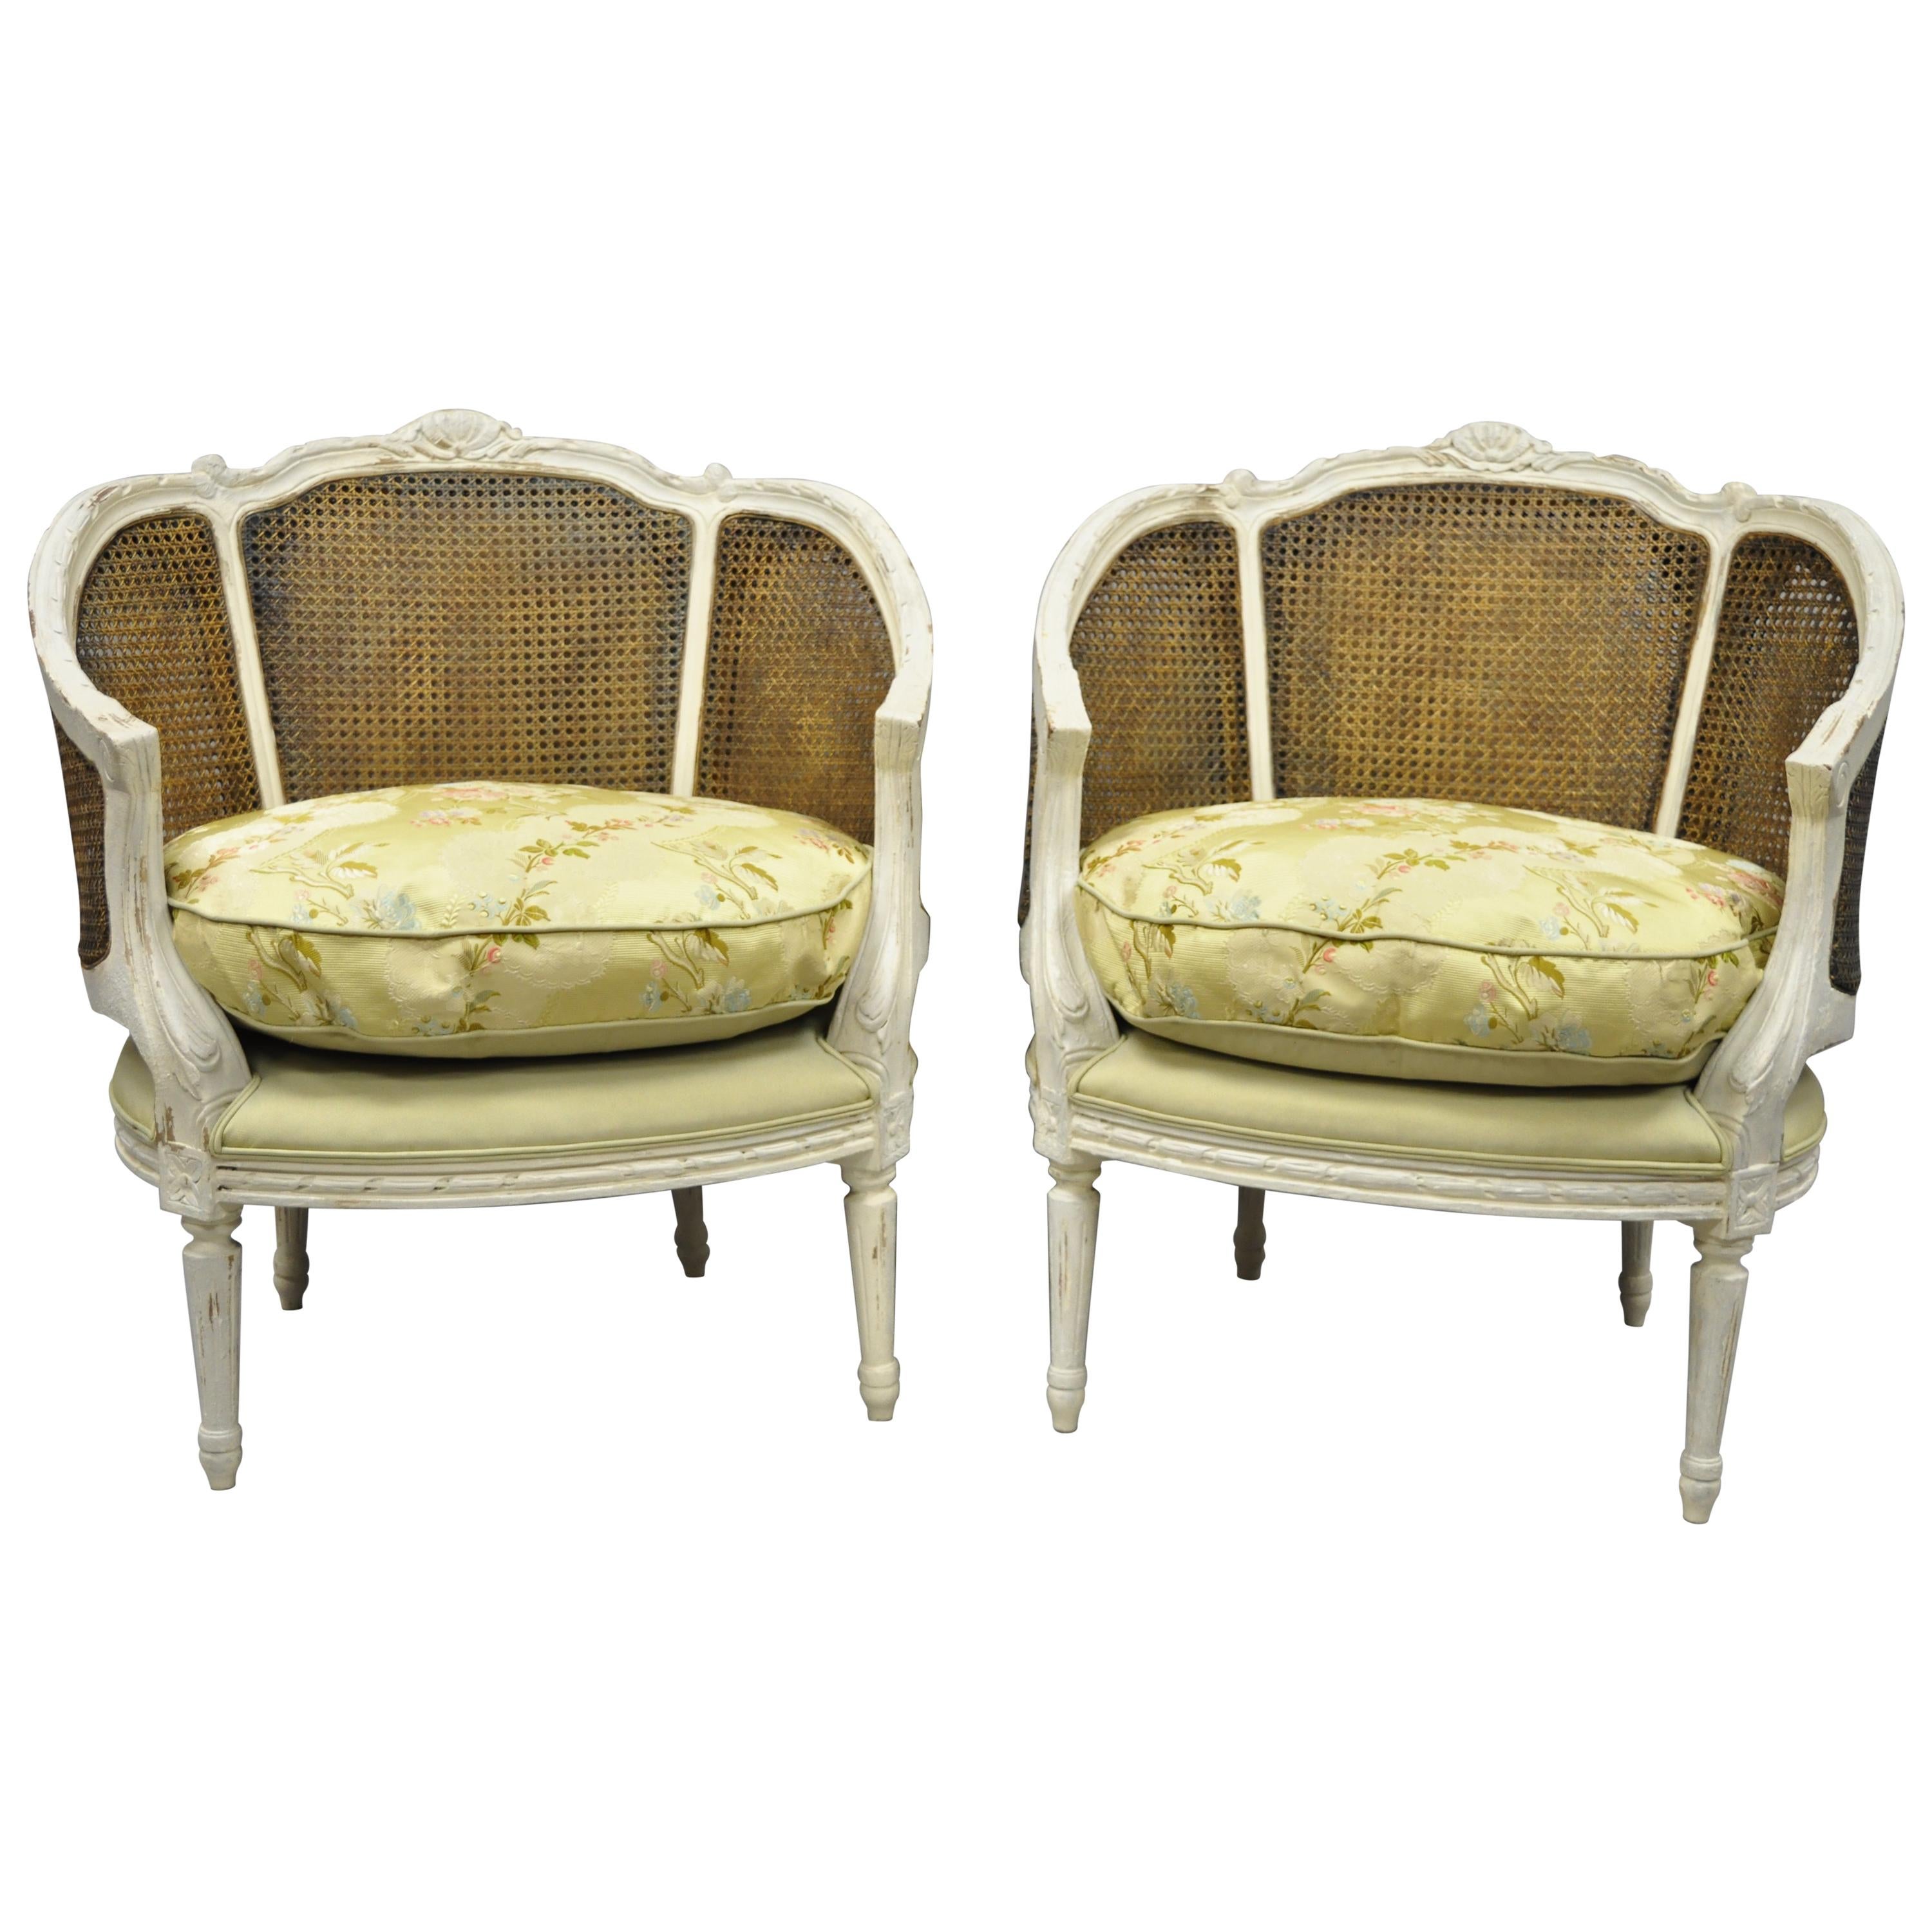 Pair of Caned French Louis XVI Style White Distress Painted Bergere Salon Chairs For Sale